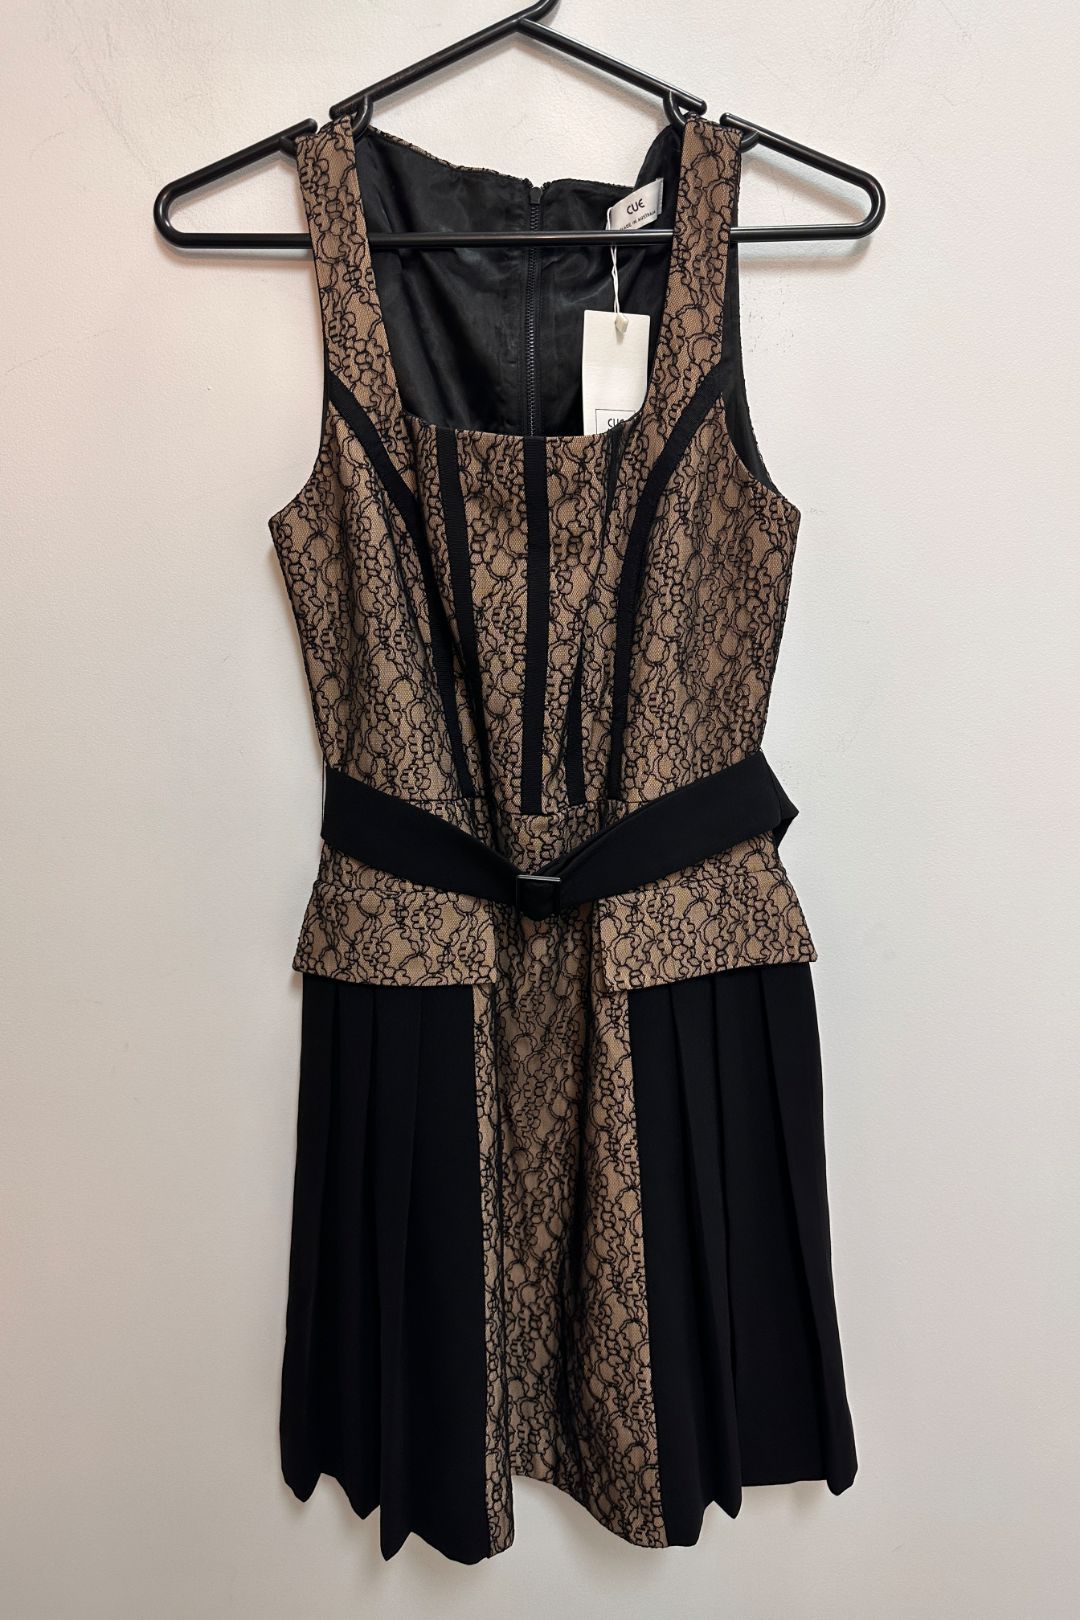 Cue in Black and Beige Lace Dress